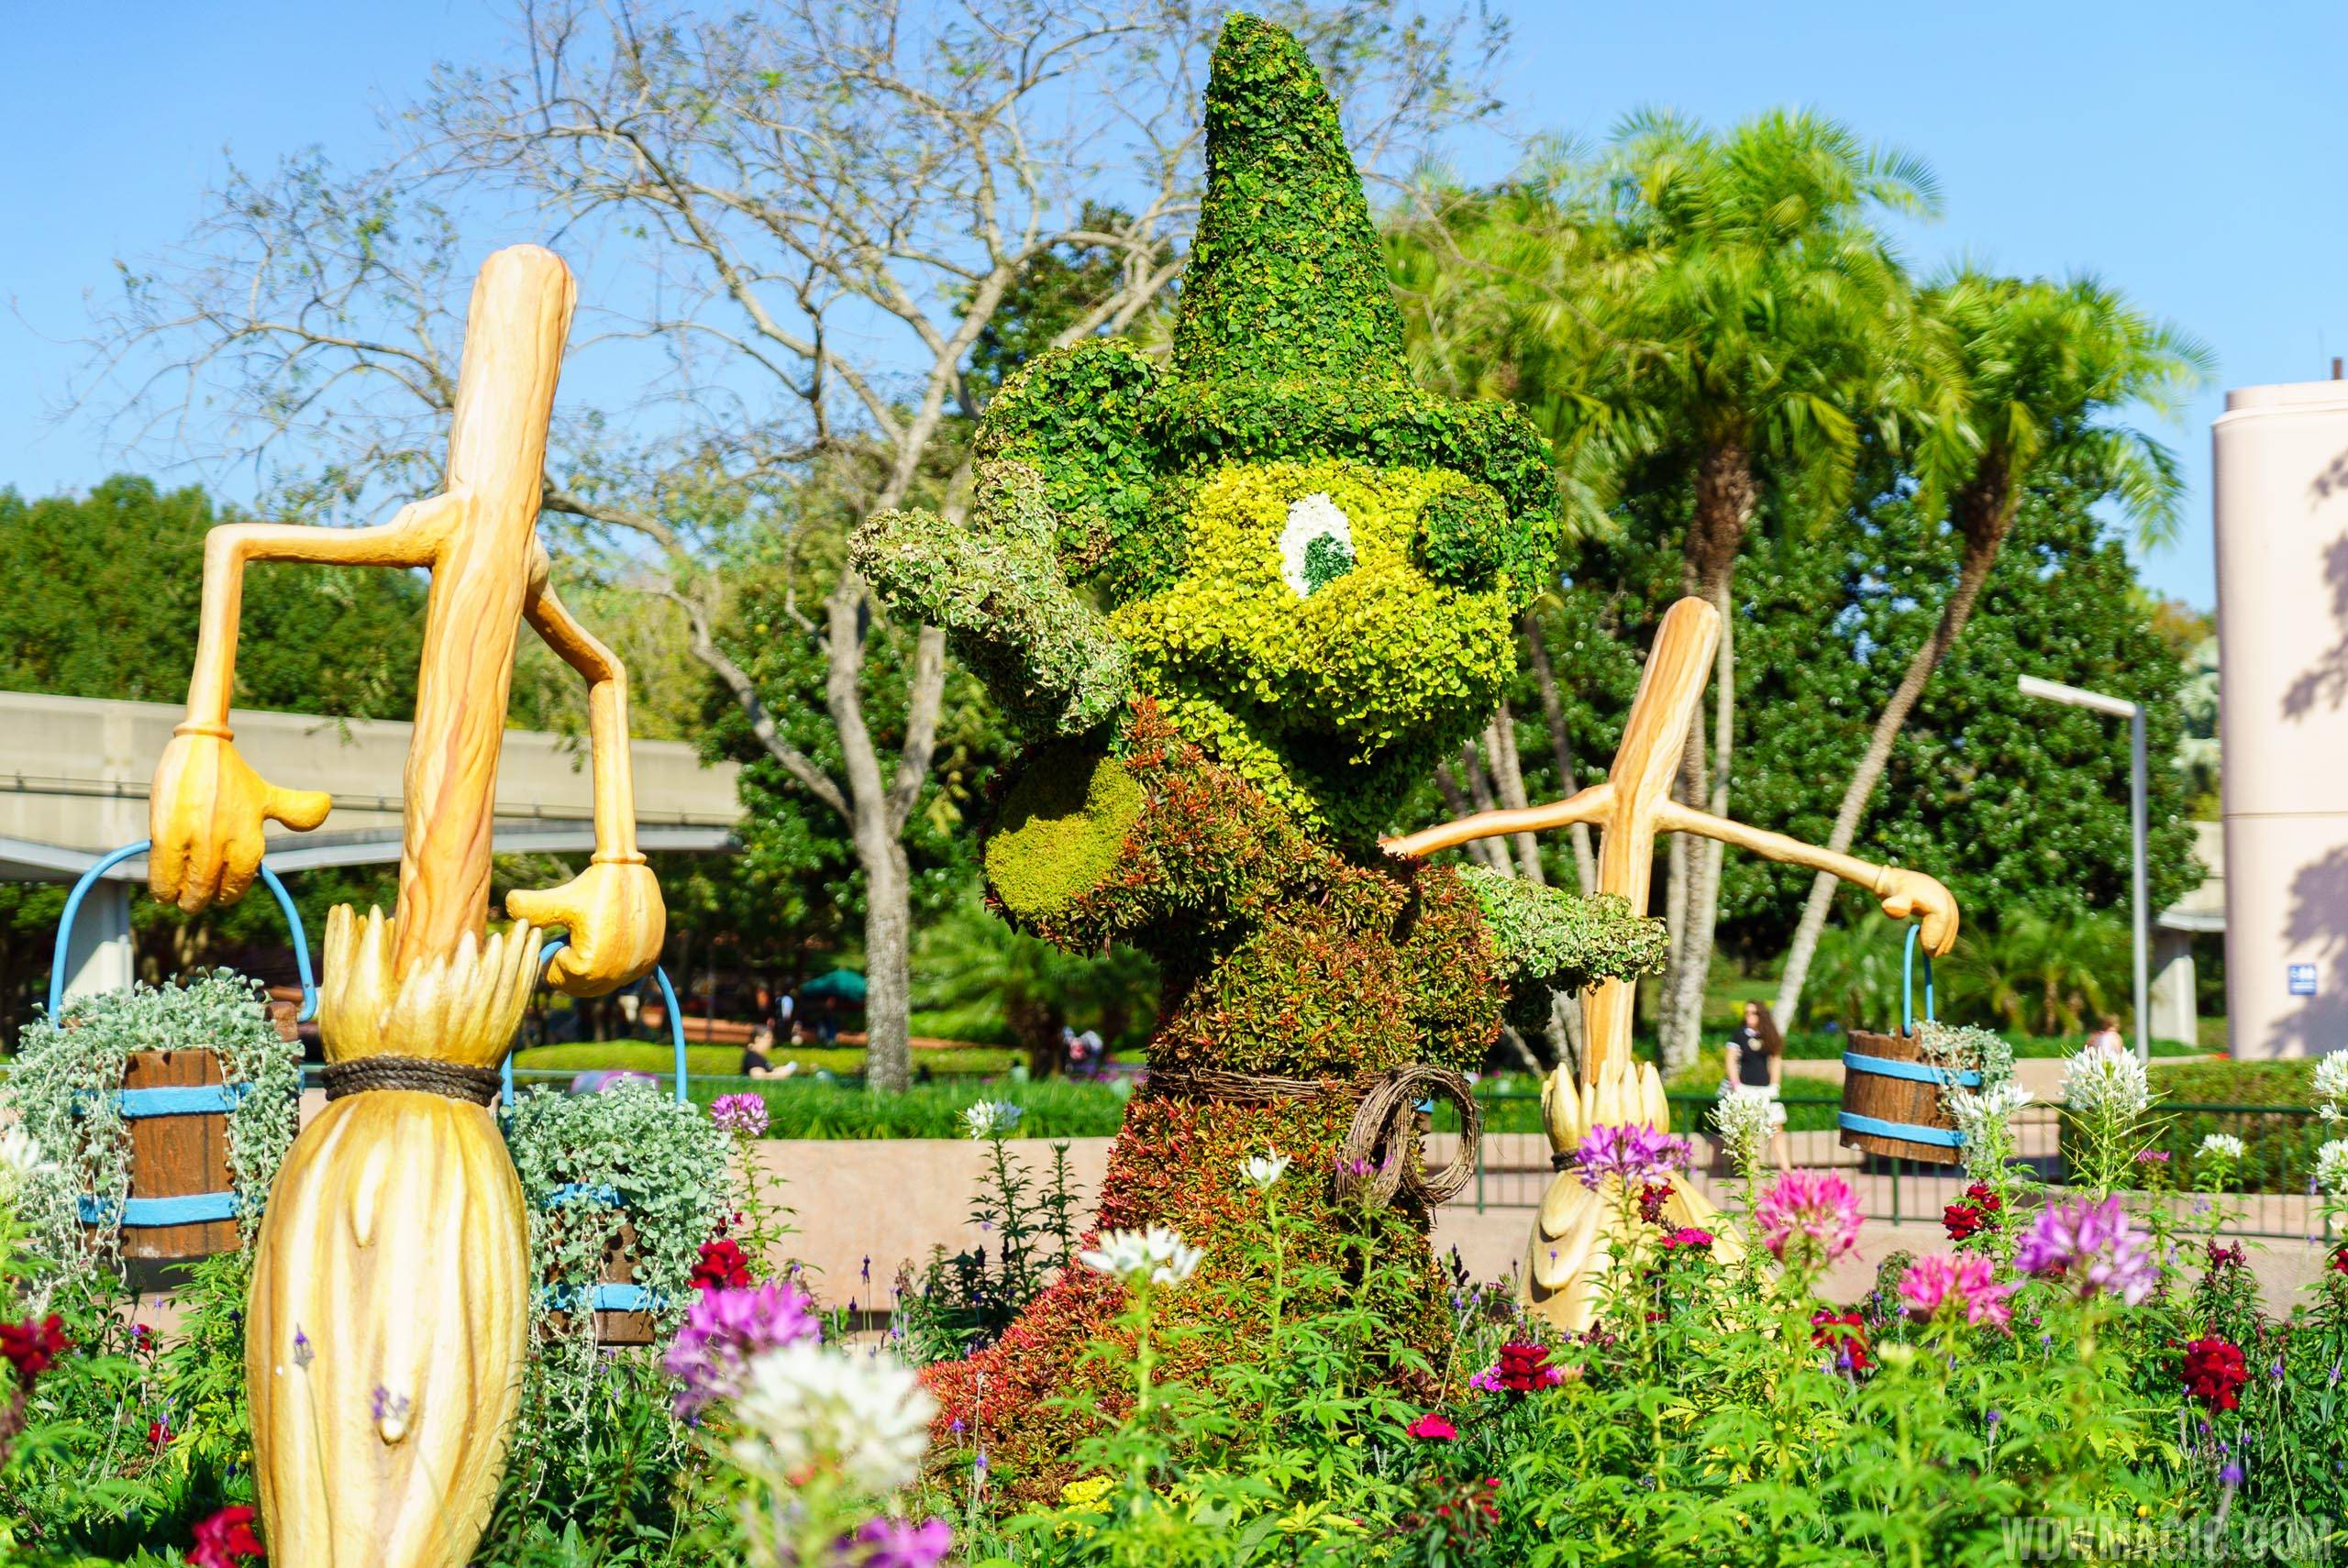 2016 Epcot International Flower and Garden Festival - Sorcerer Mickey topiary